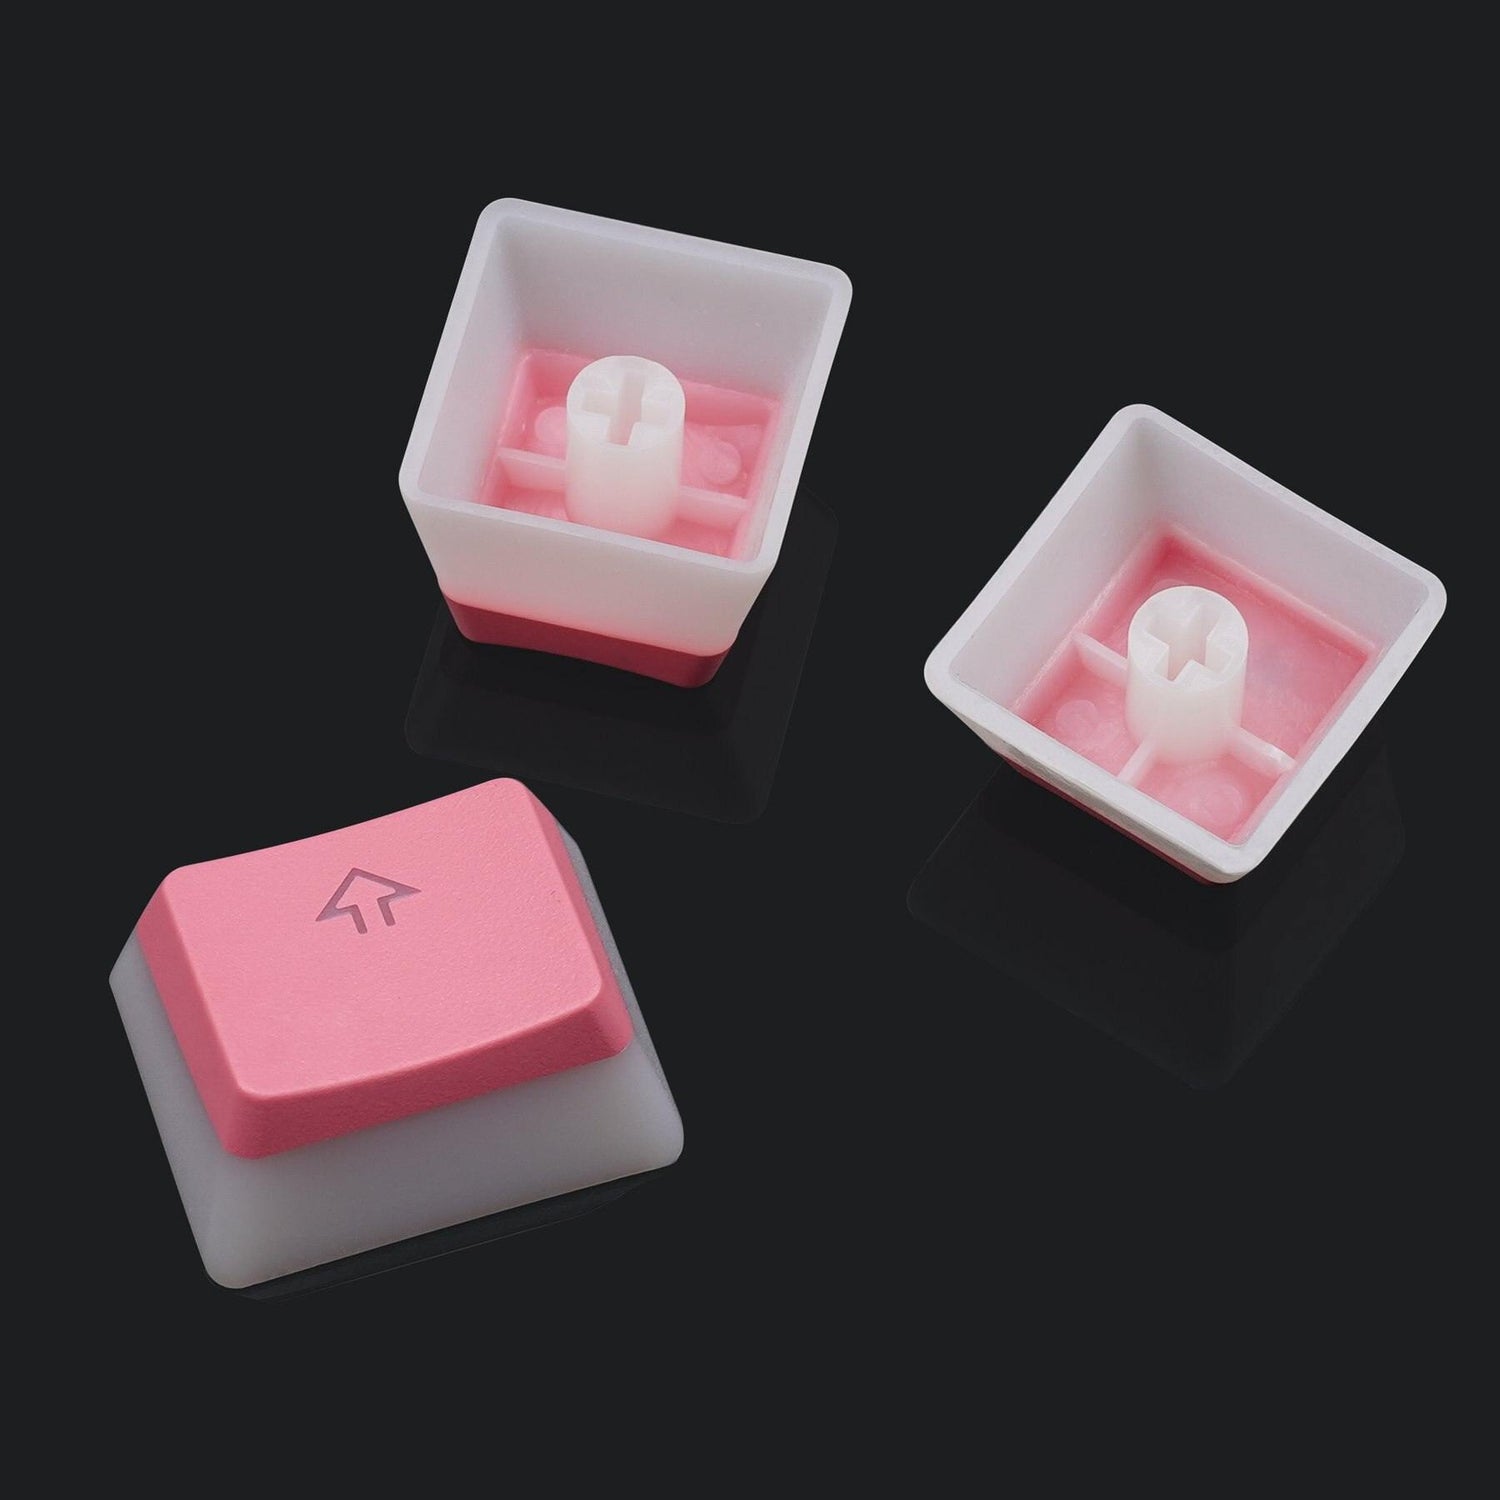 COLOURED PUDDING OEM PROFILE PBT KEYCAPS - THE KEYCAP CLUB